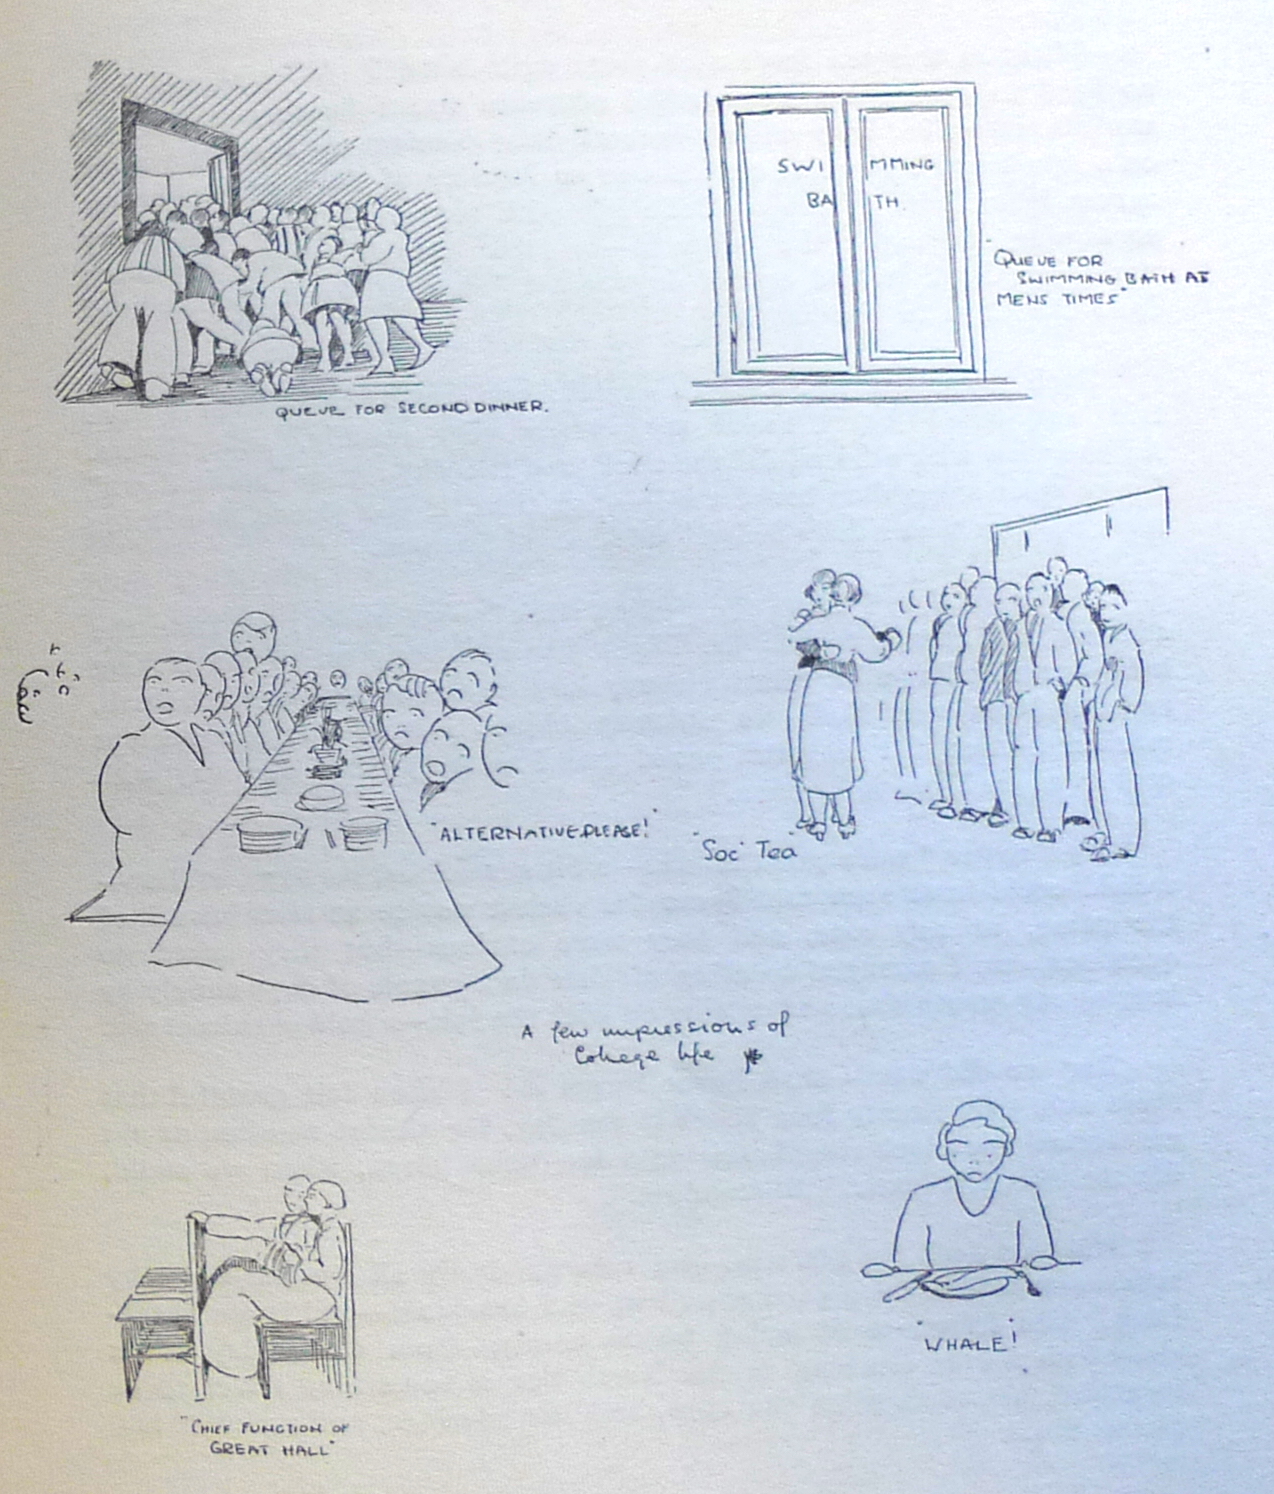 Witty sketches of life for students at Goldsmiths College in 1933 for Smith Magazine of that year. Image: Goldsmiths, University of London Special Collections.